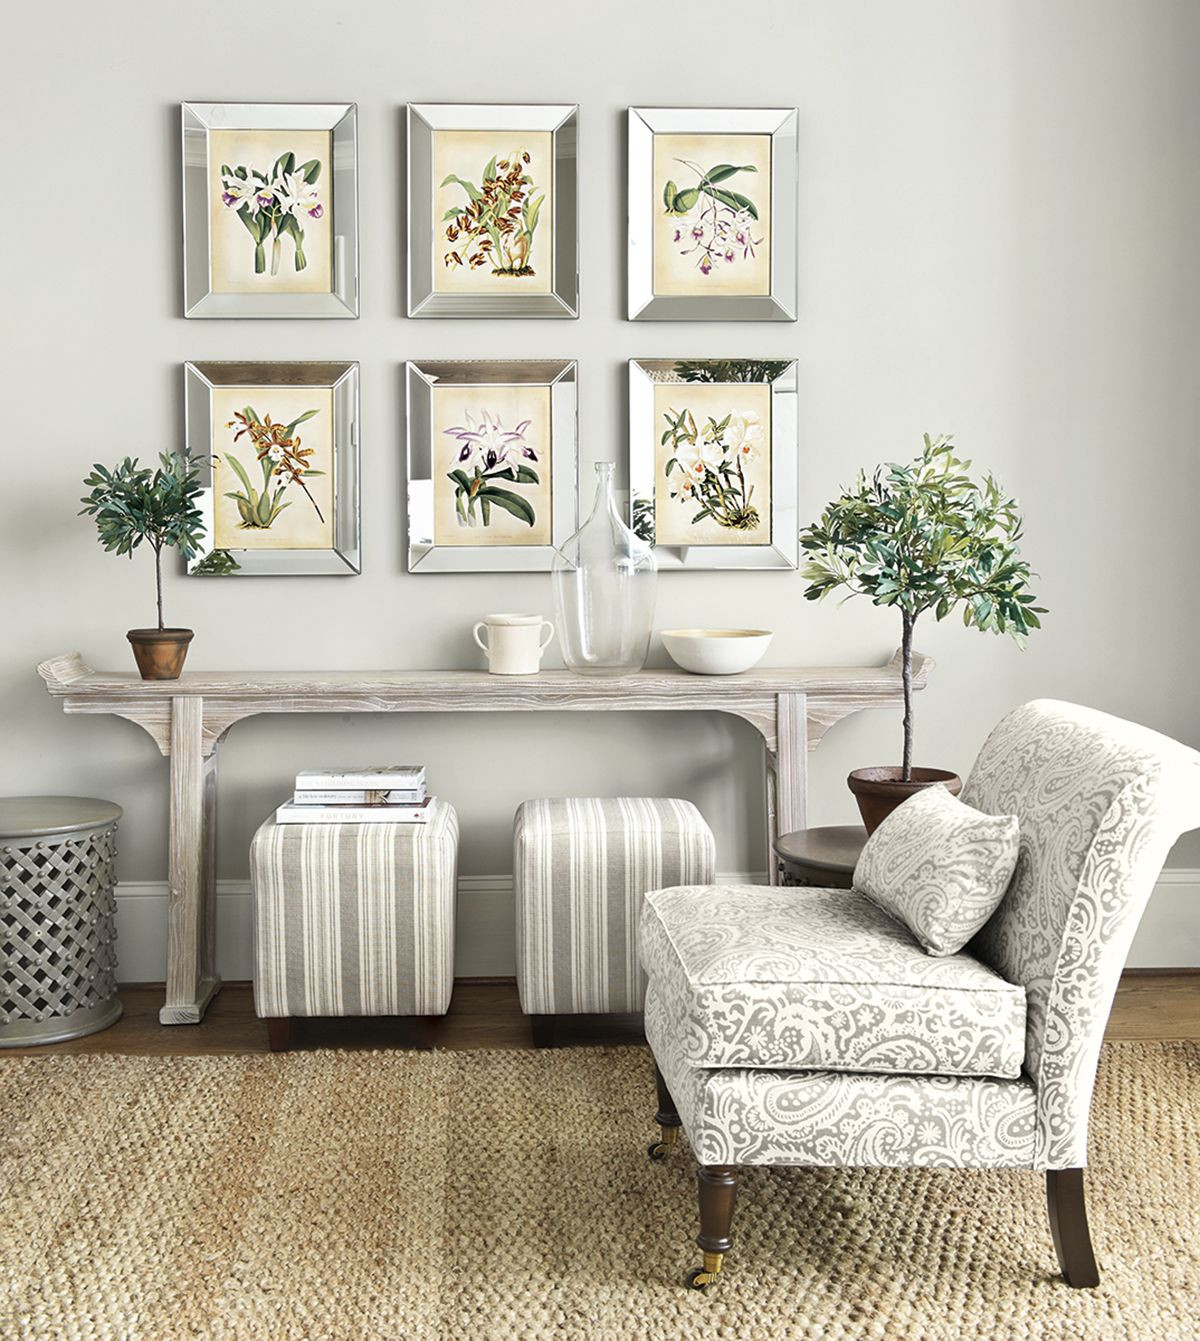 Neutral Colors For Living Room
 How to Use Neutral Colors without Being Boring A Room by